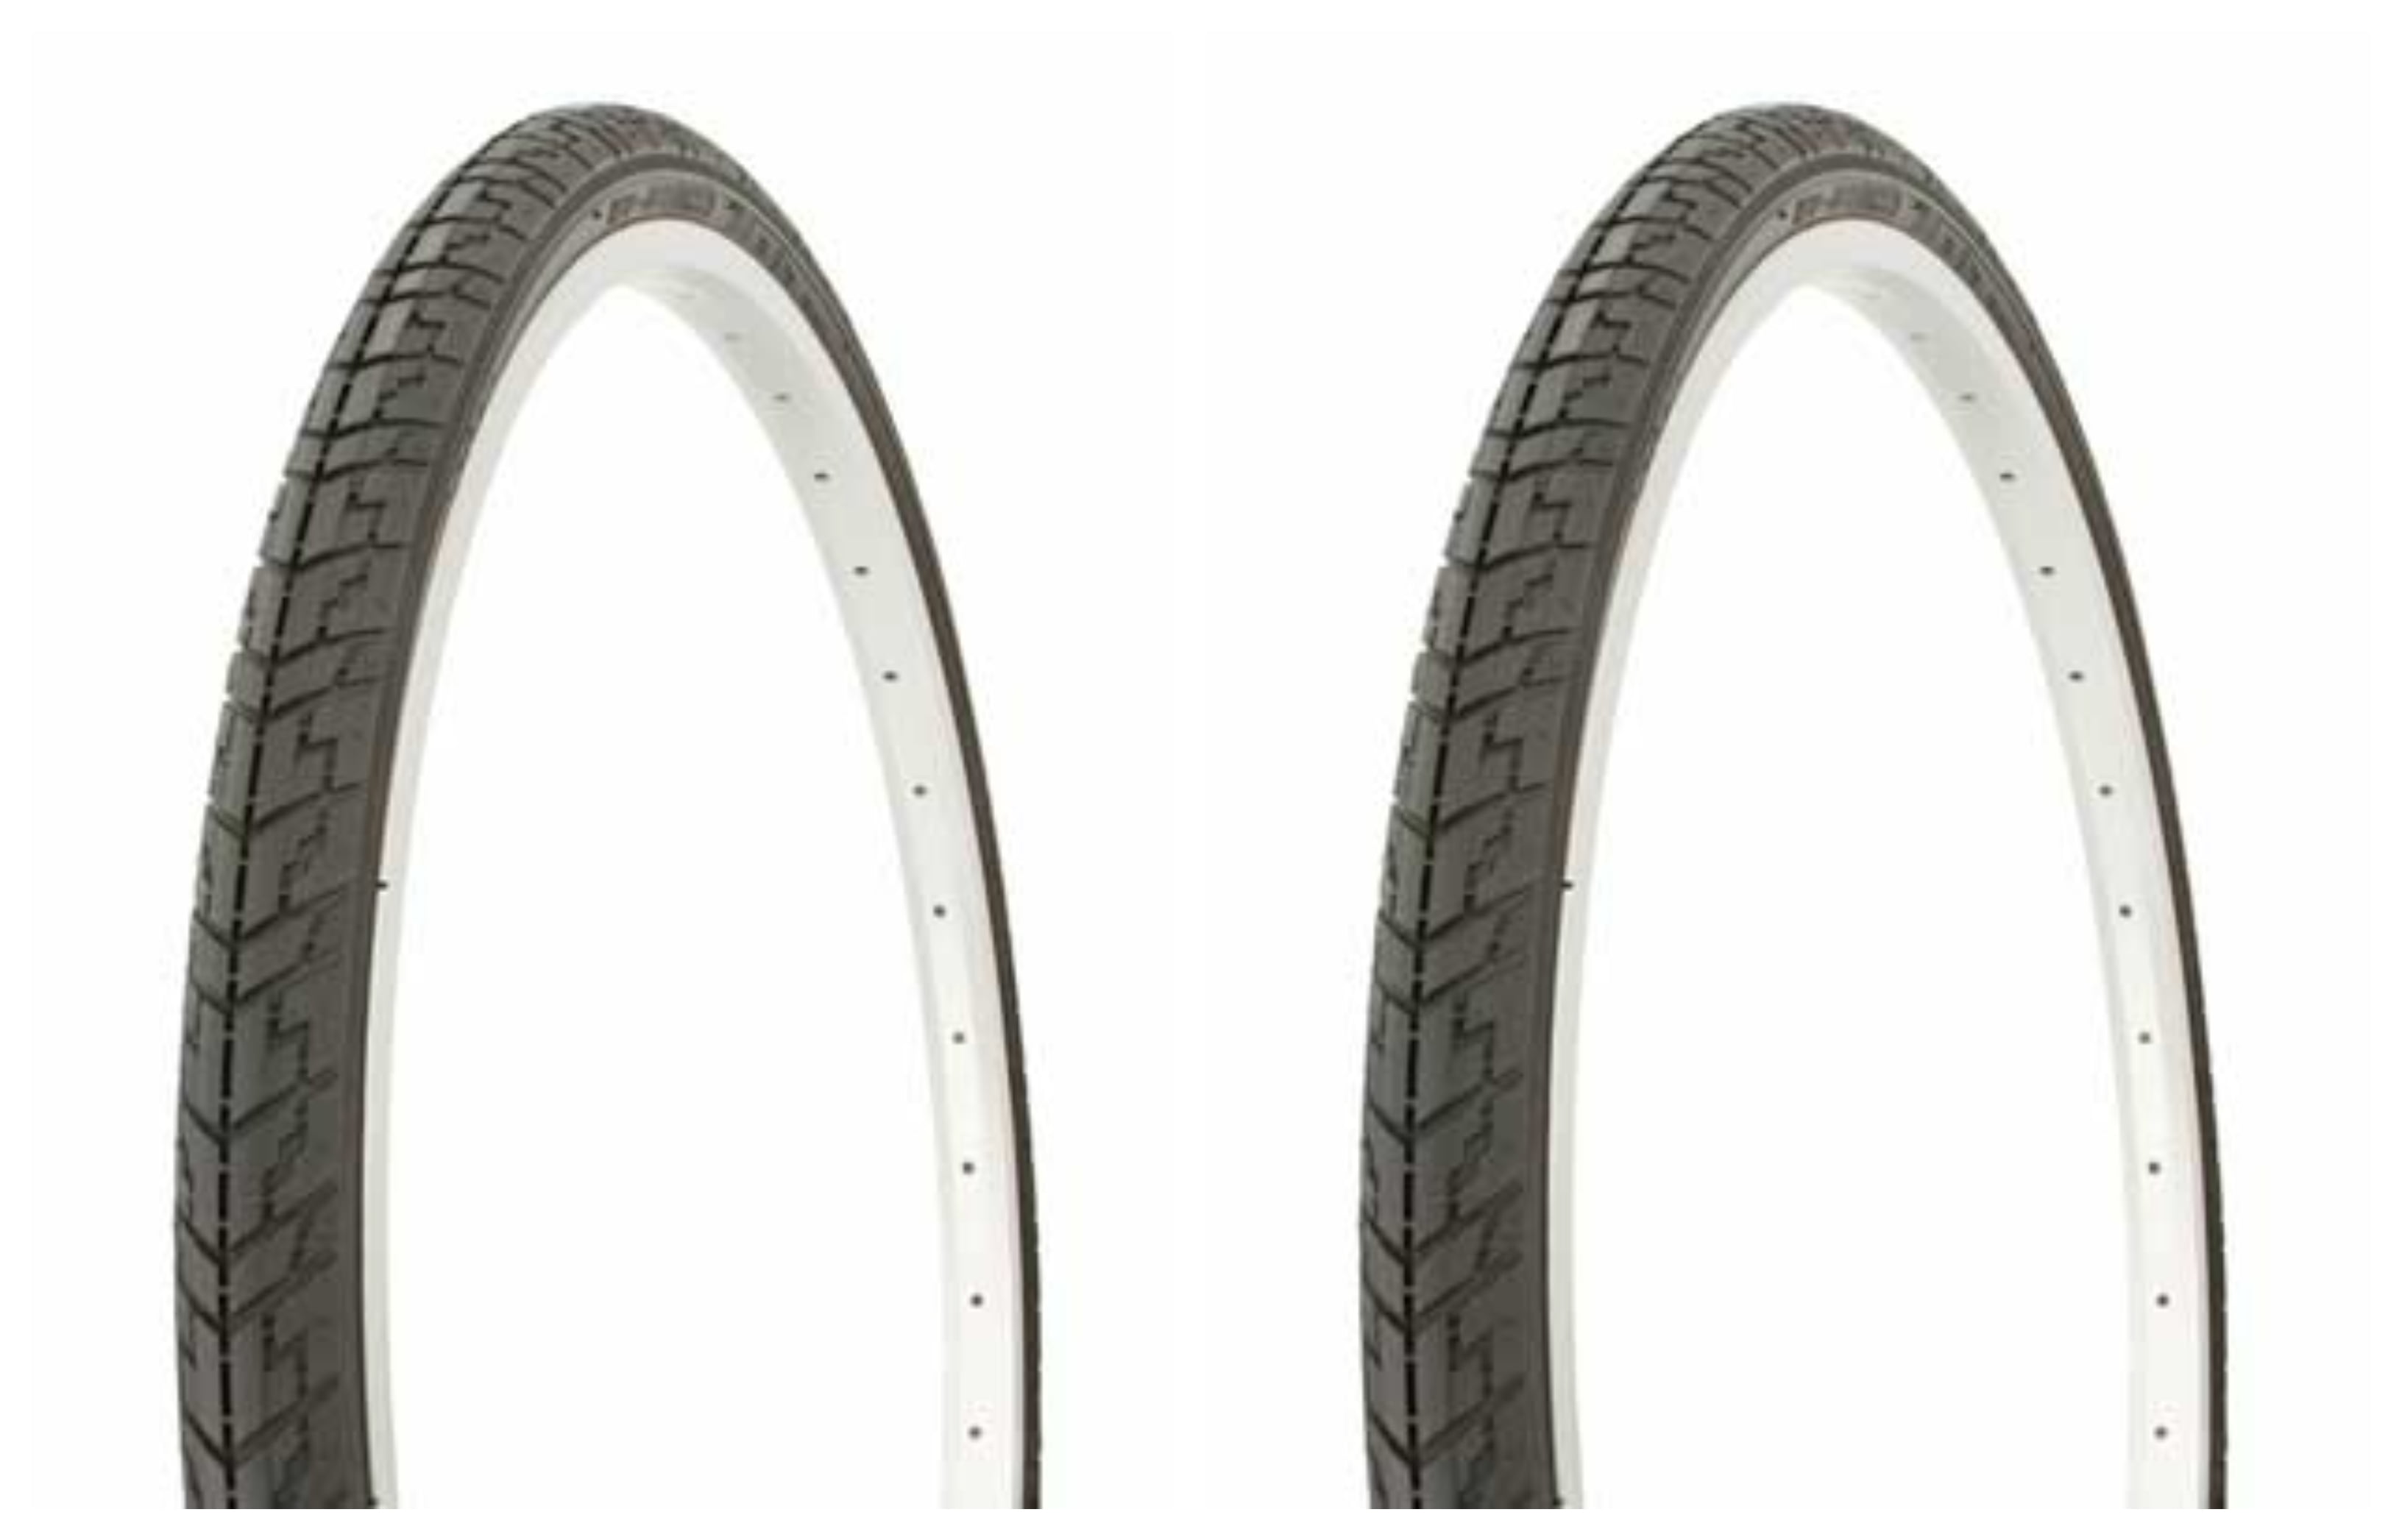 NEW DURO TIRE IN 24 X 1 3/8 BLACK/BLACK SIDE WALL HF-109. 